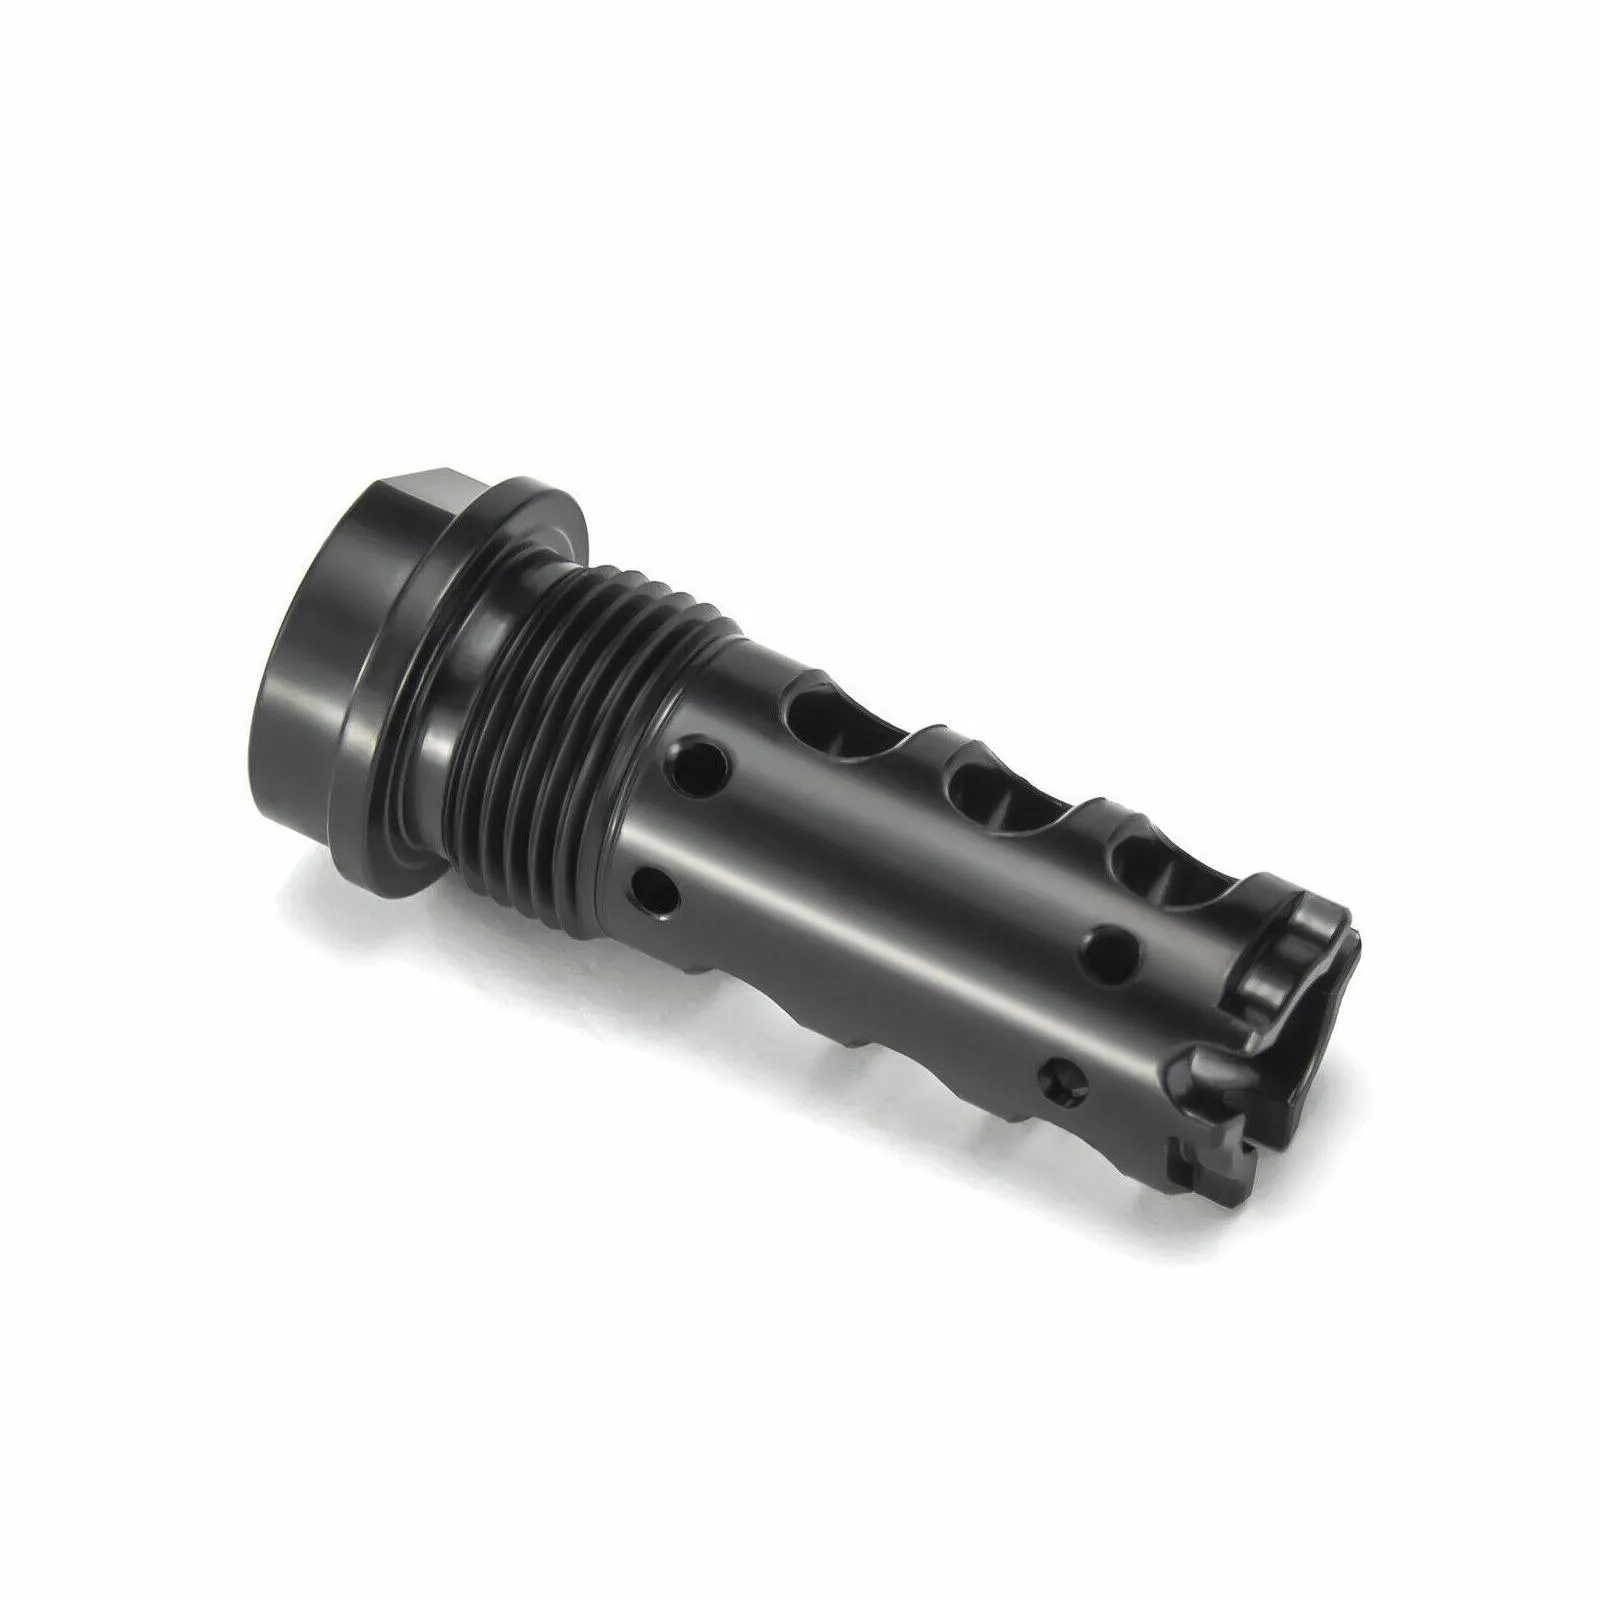 fittings upgrade stainless steel 1/228 5/8x24 muzzle brake compensator 1.375x24 tpi threads mount